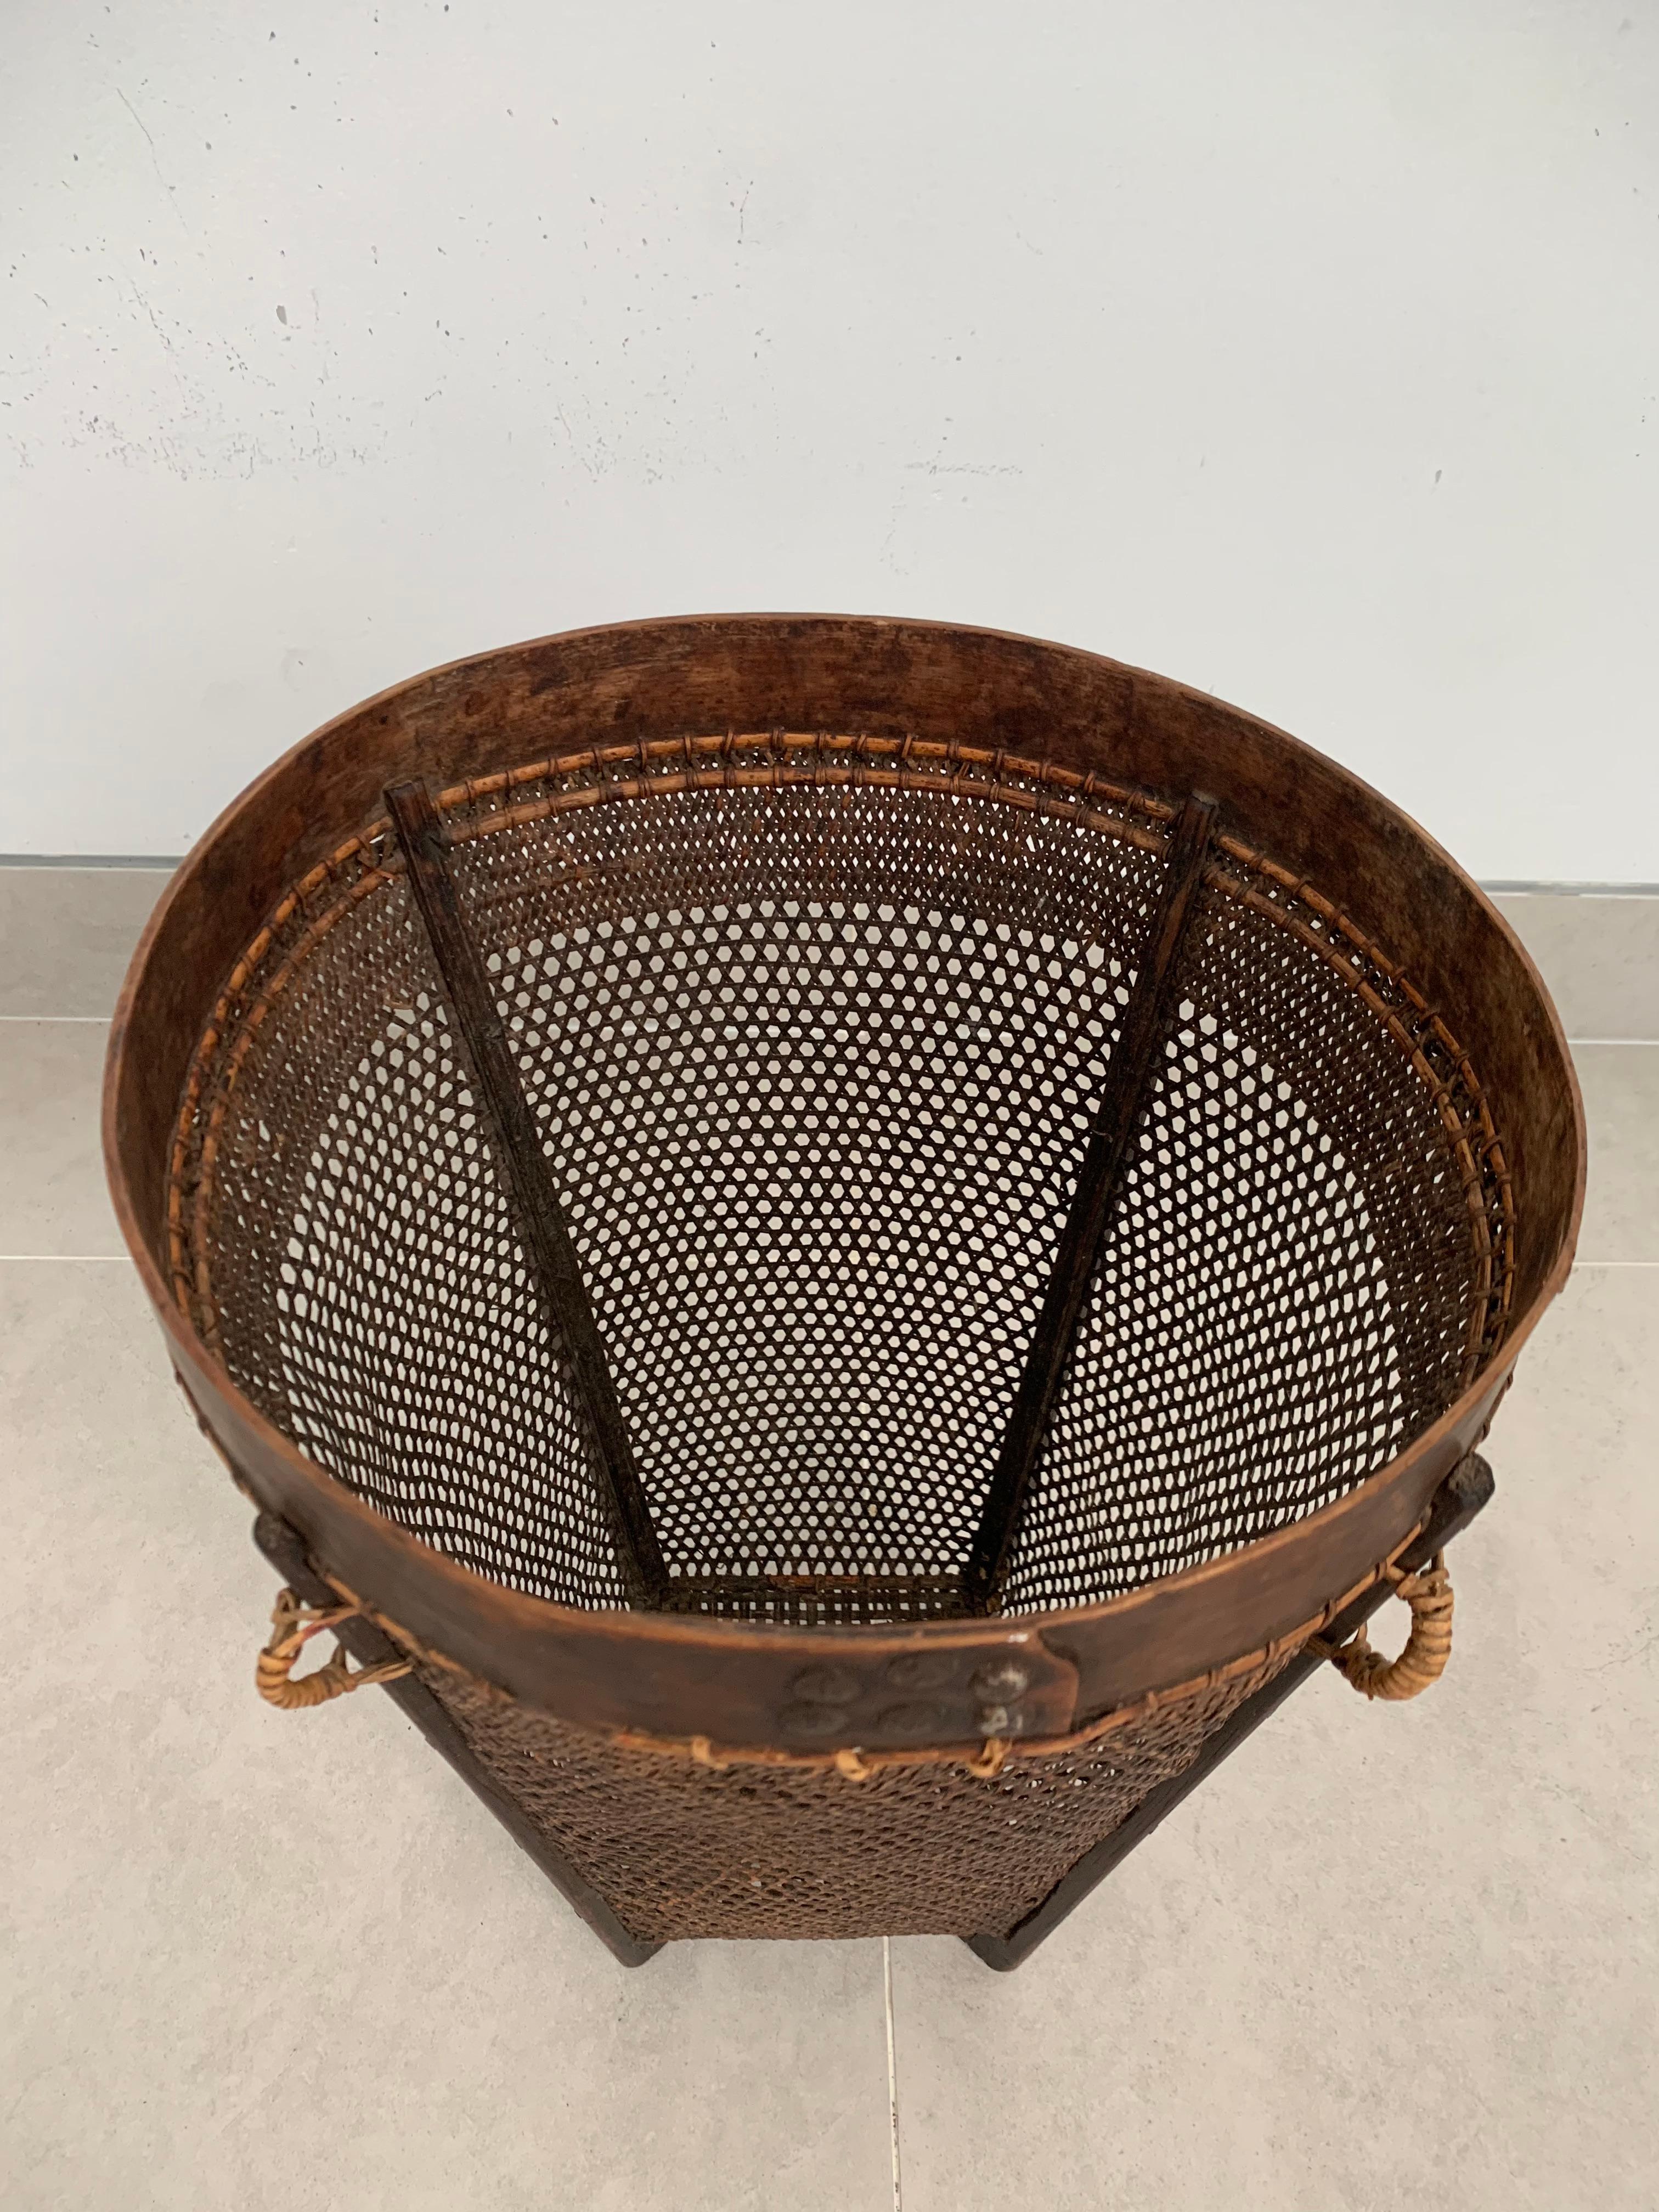 Rattan Basket Dayak Tribe Hand-Woven from Kalimantan, Borneo, Mid 20th Century For Sale 2